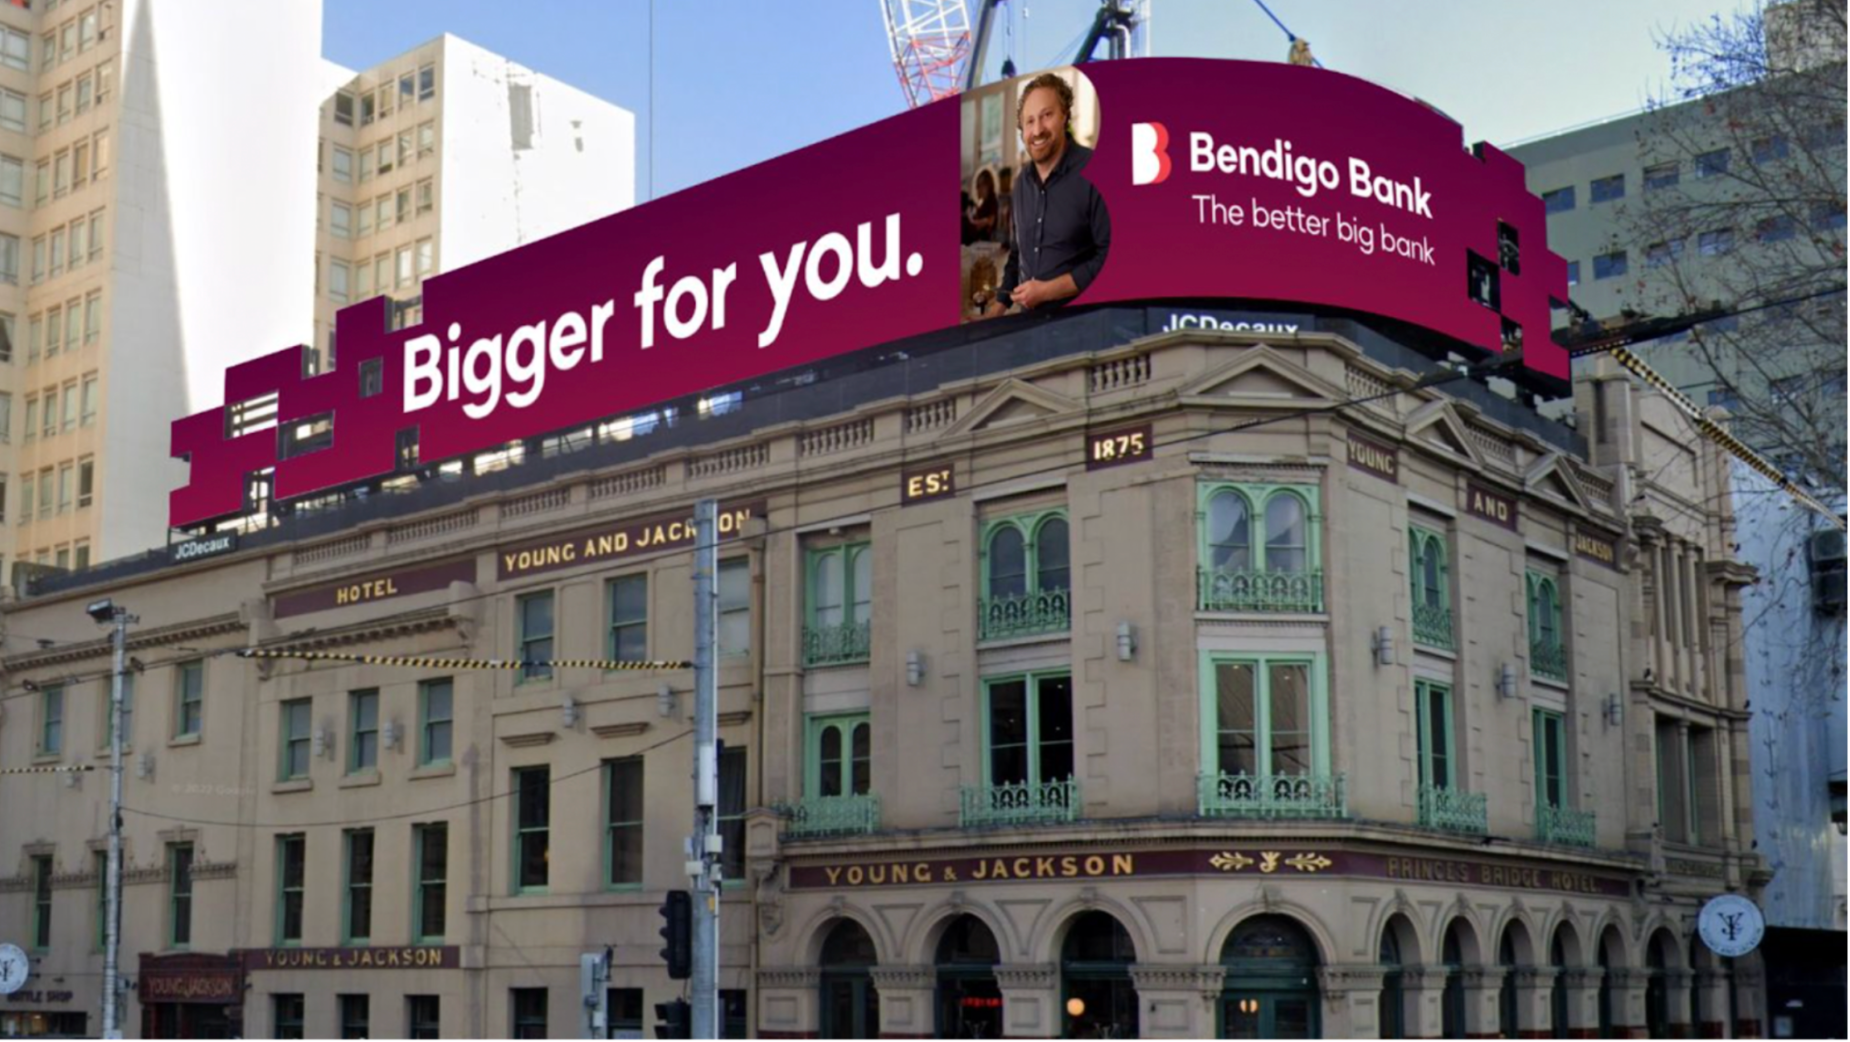 Major Brand Campaign Launched by Bendigo Bank